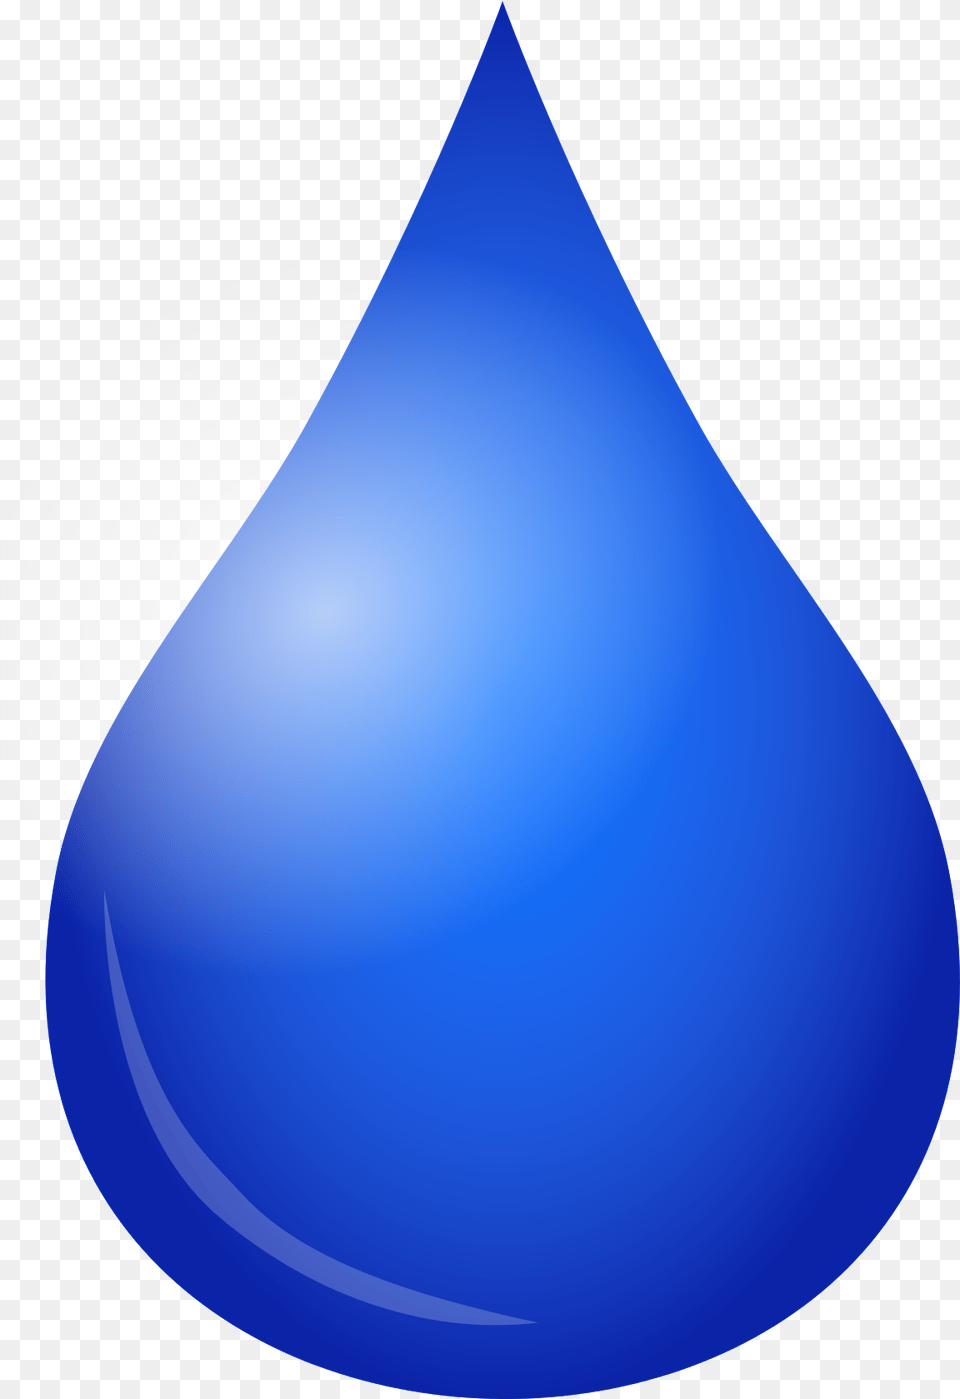 Blue Drop Water Drop Bullet Point, Droplet, Lighting, Triangle, Astronomy Png Image